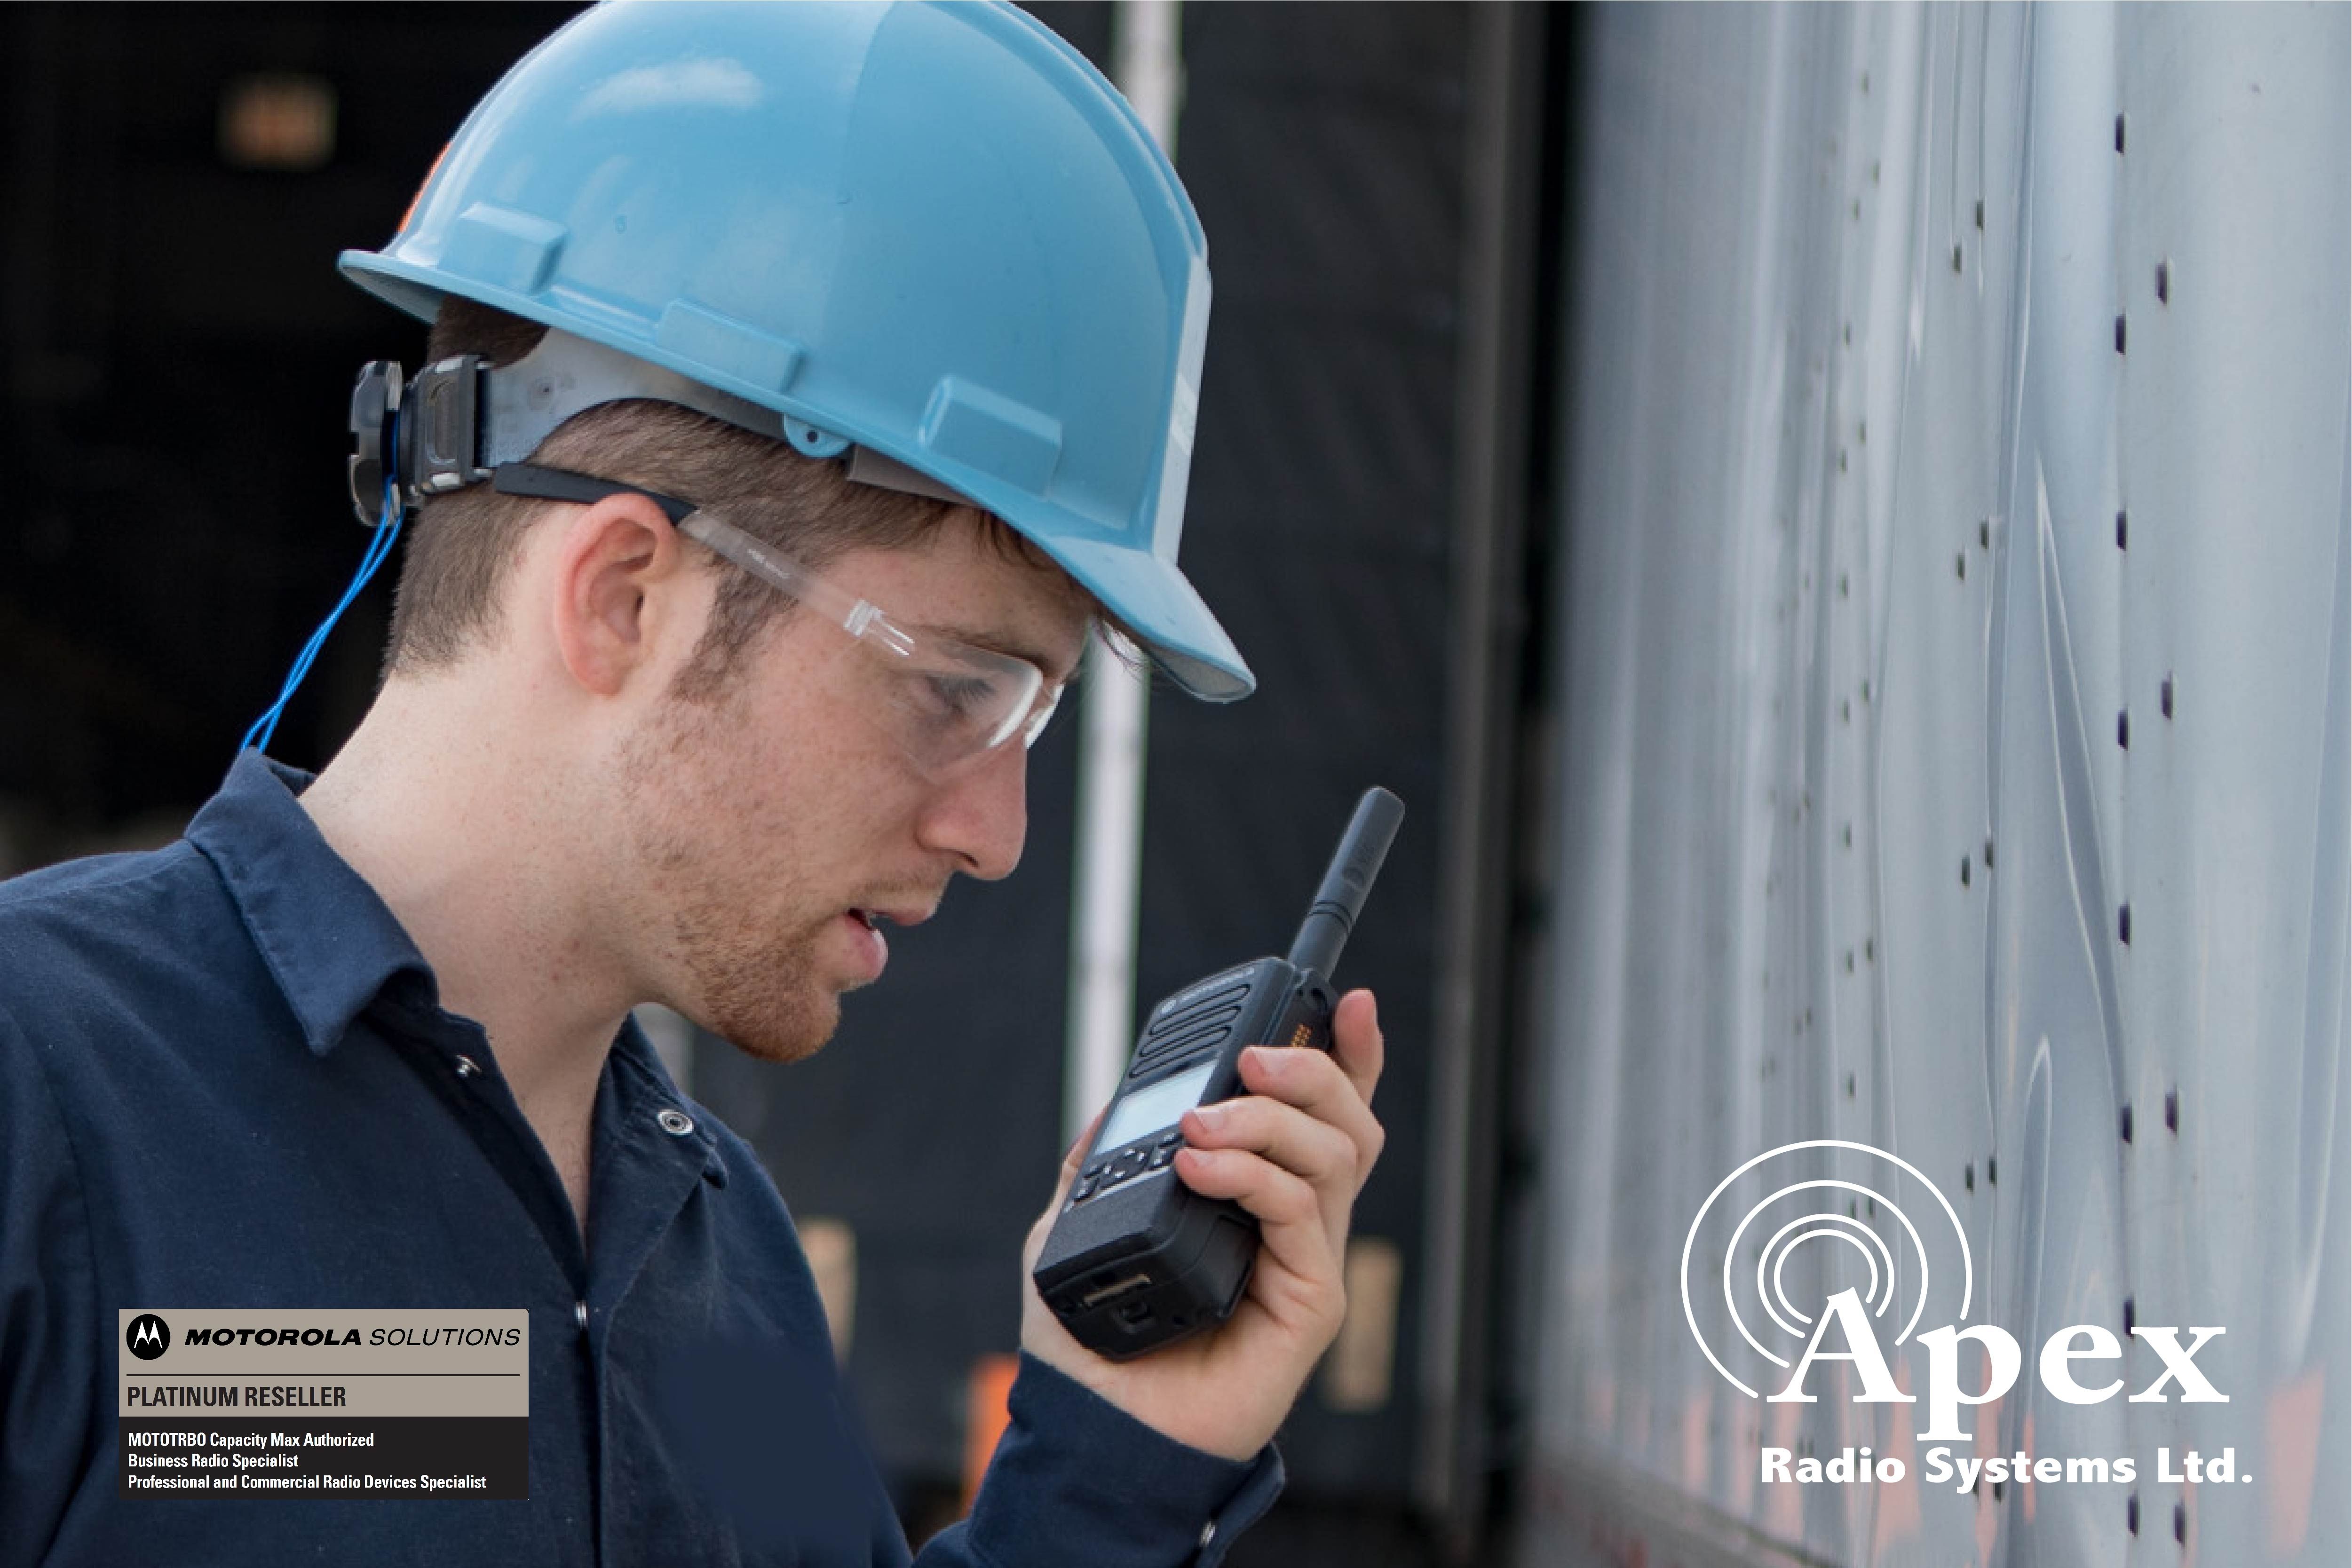 Safety first with Apex Radio Systems